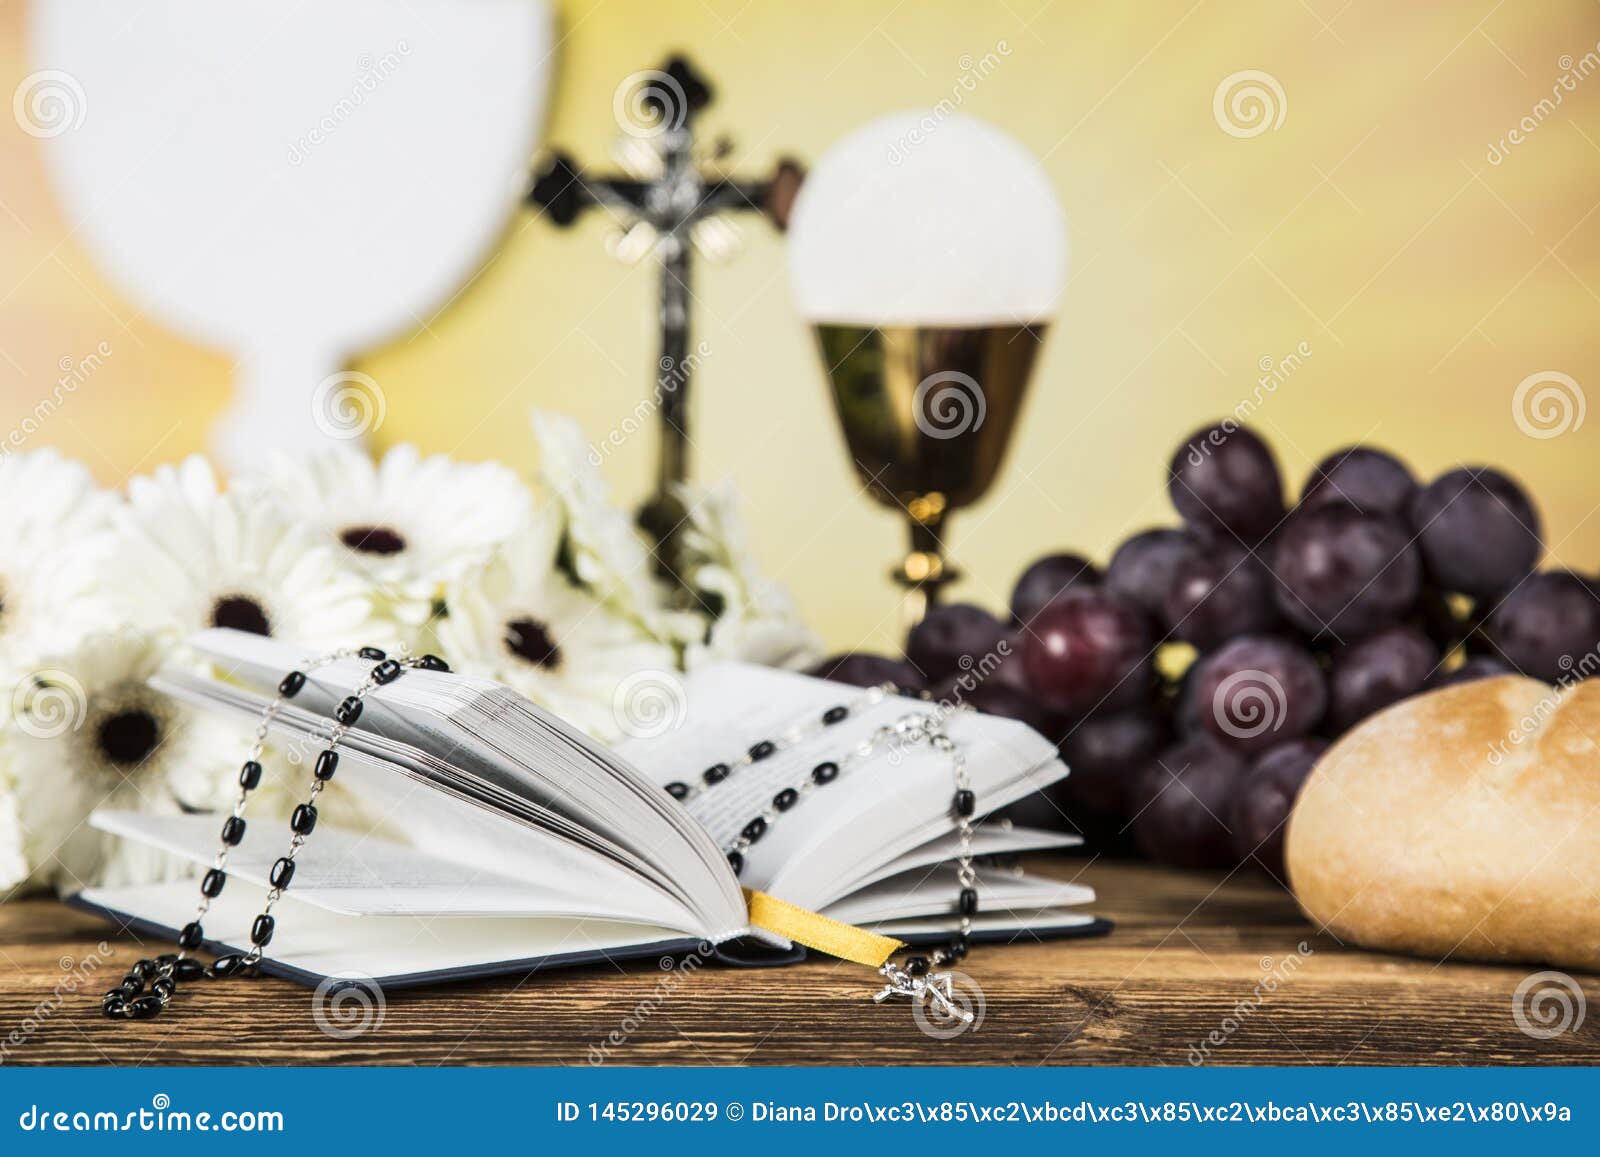 The Background Of The First Holy Communion Stock Photo 145296029 - Megapixl